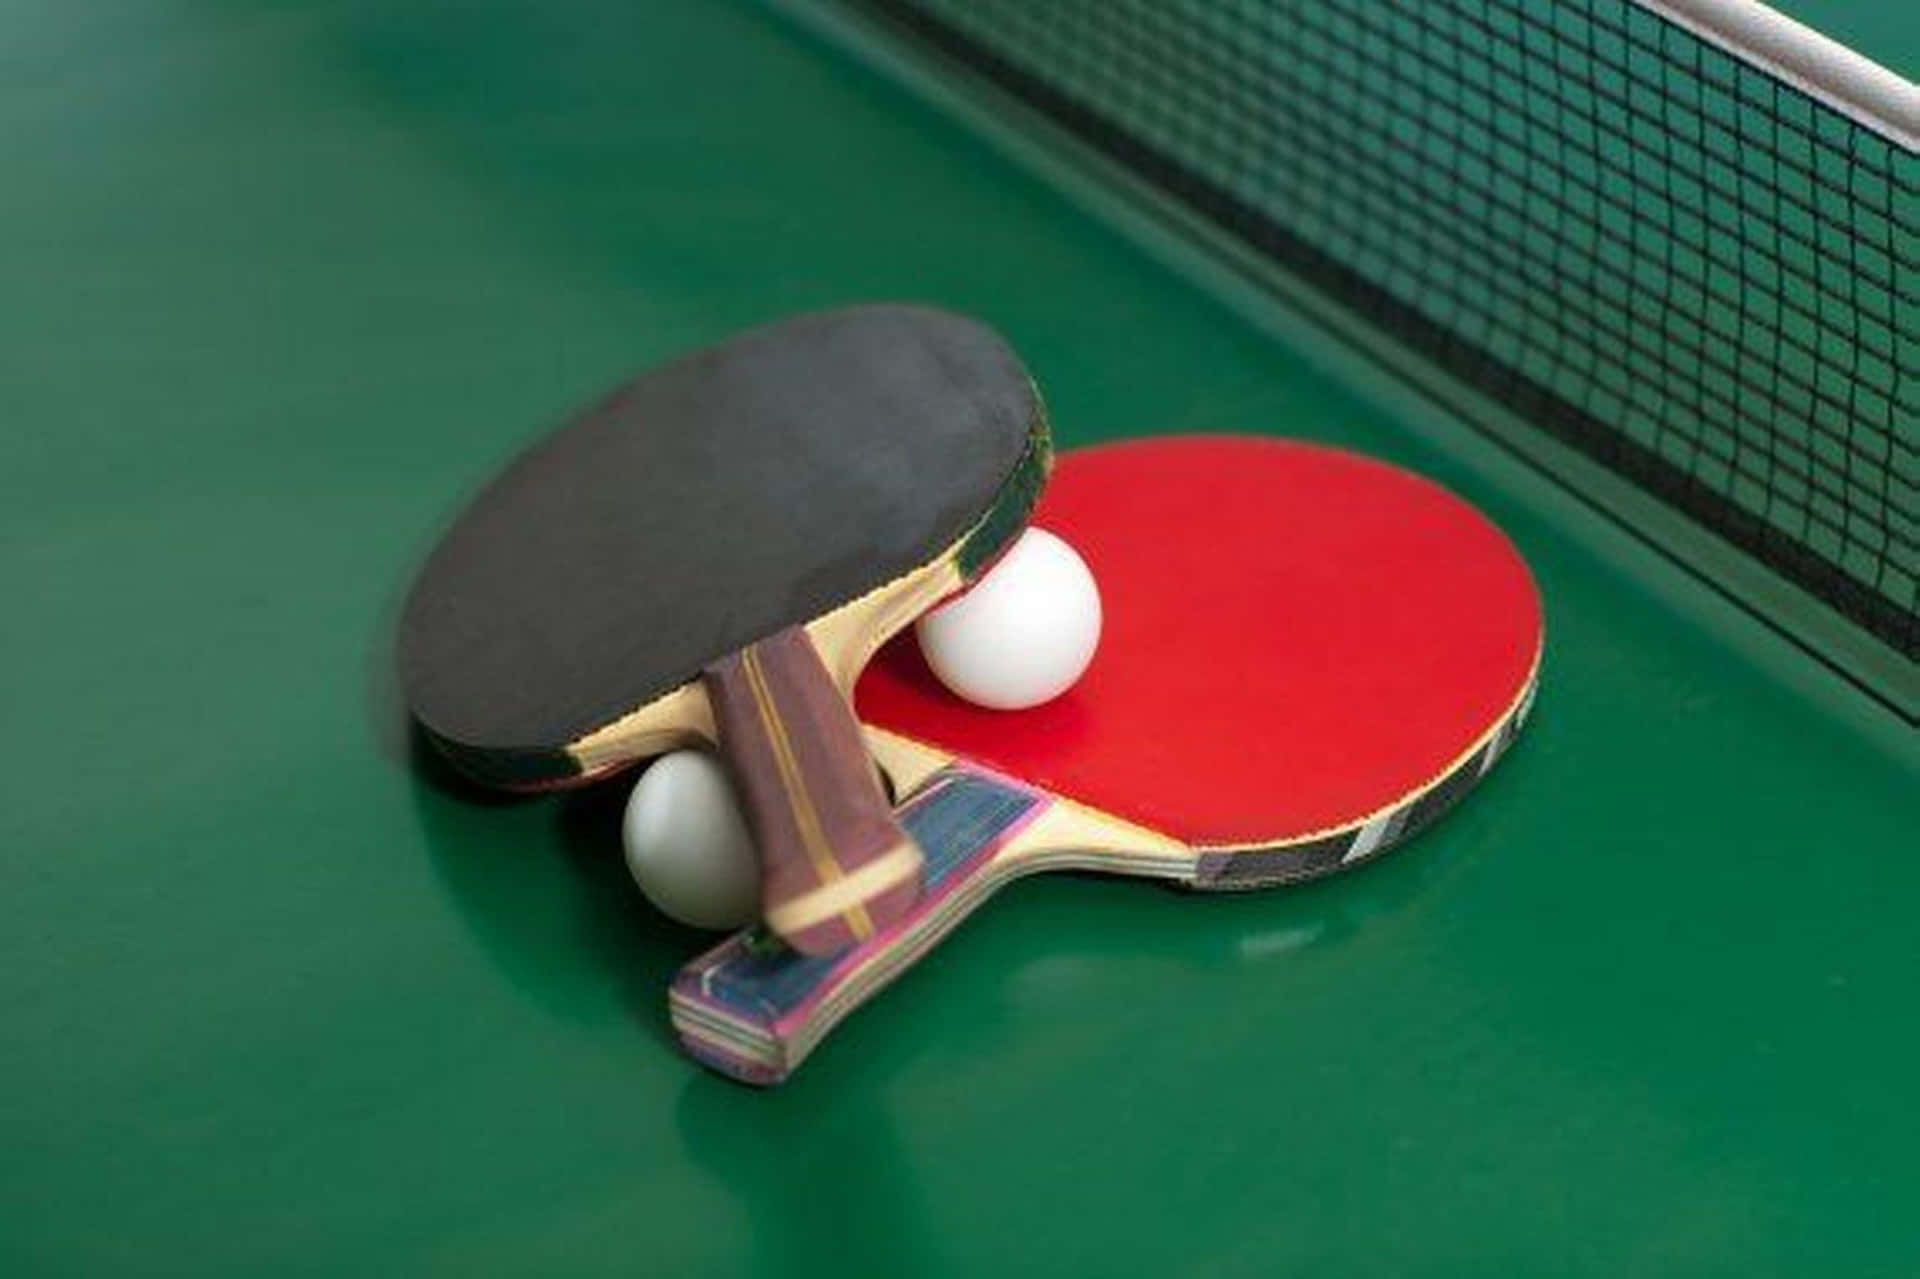 Ping Pong Paddles On A Green Table